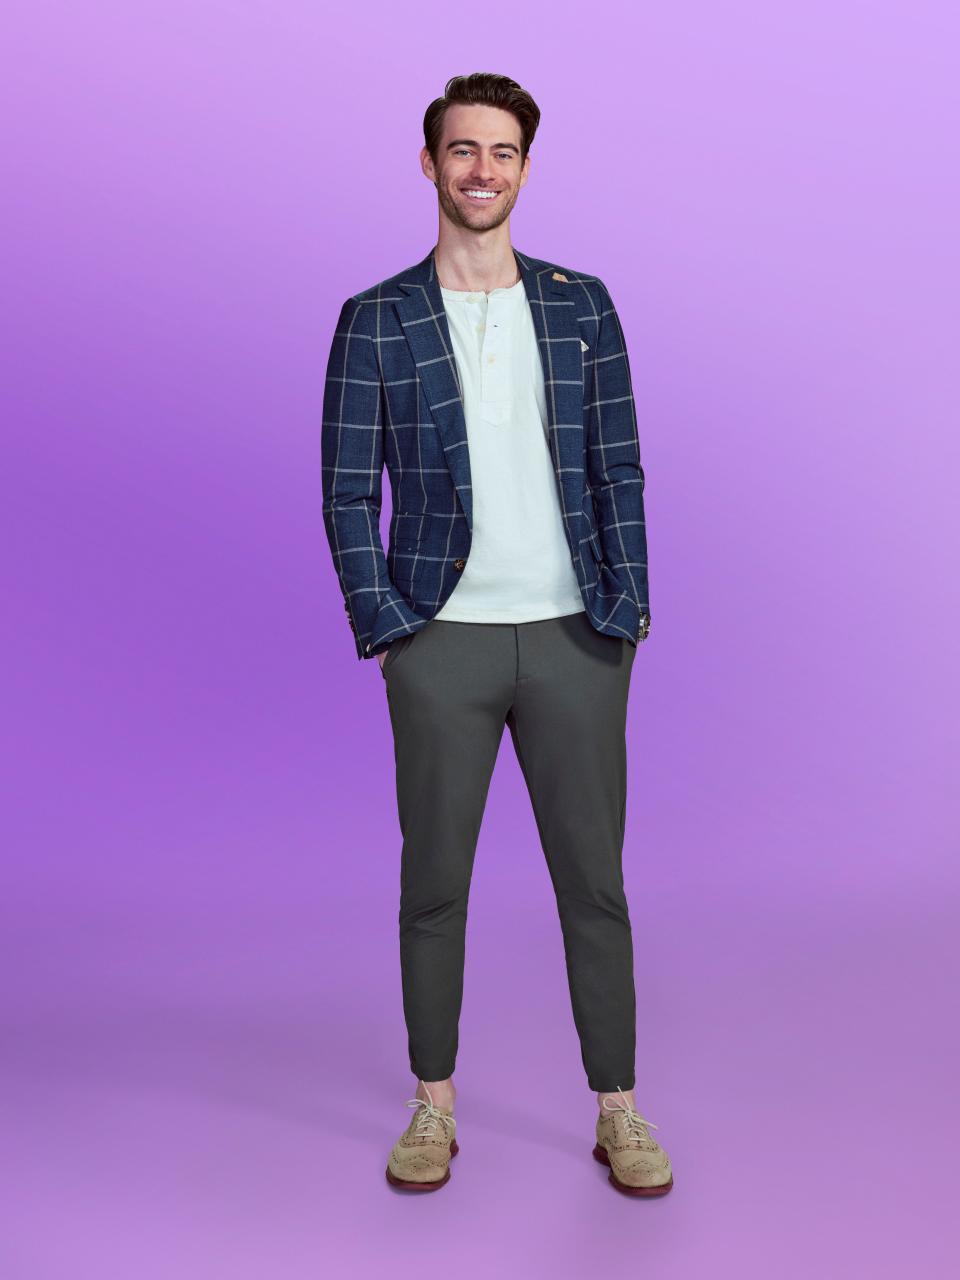 Nolan, a contestant on "Love Is Blind" season 6, wearing a checkered blue jacket and grey pants